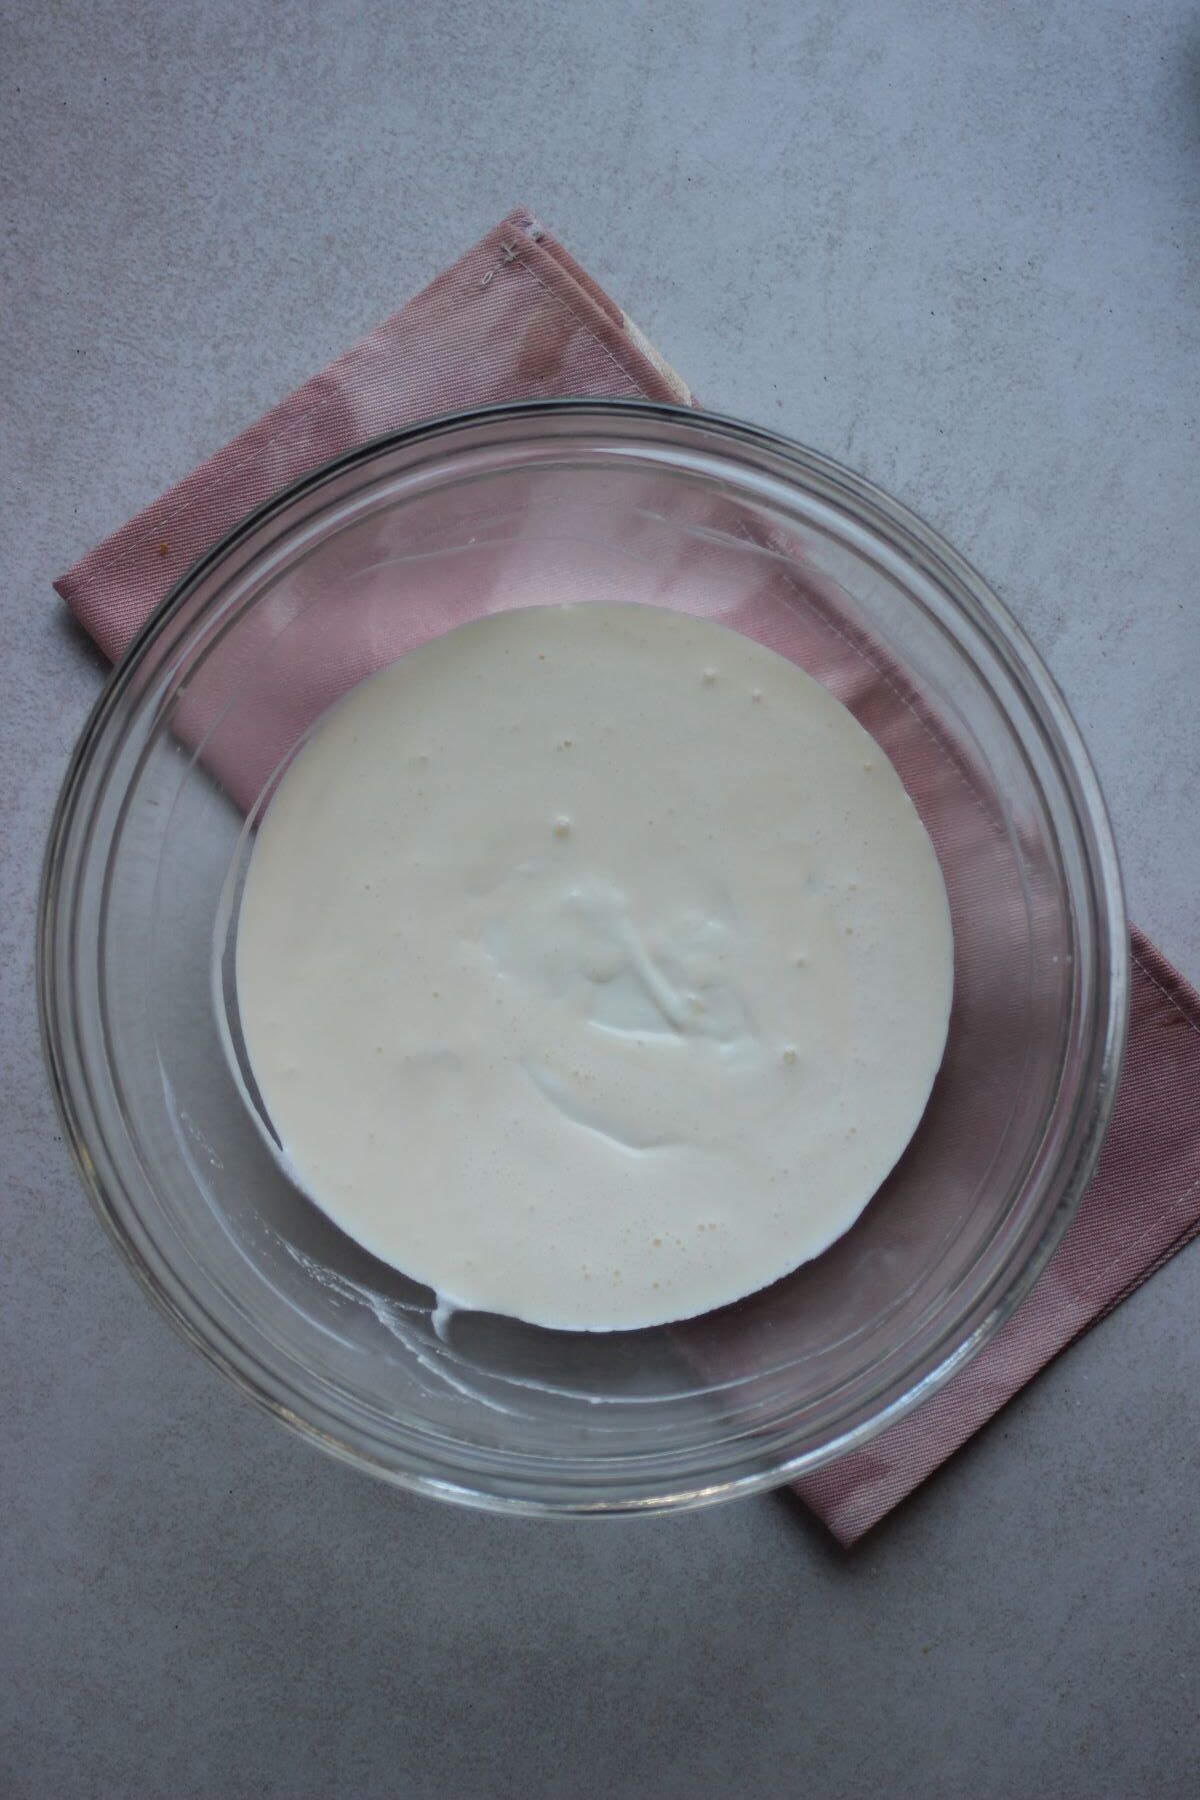 A glass bowl with a white liquid. Pink napkin under the bowl.